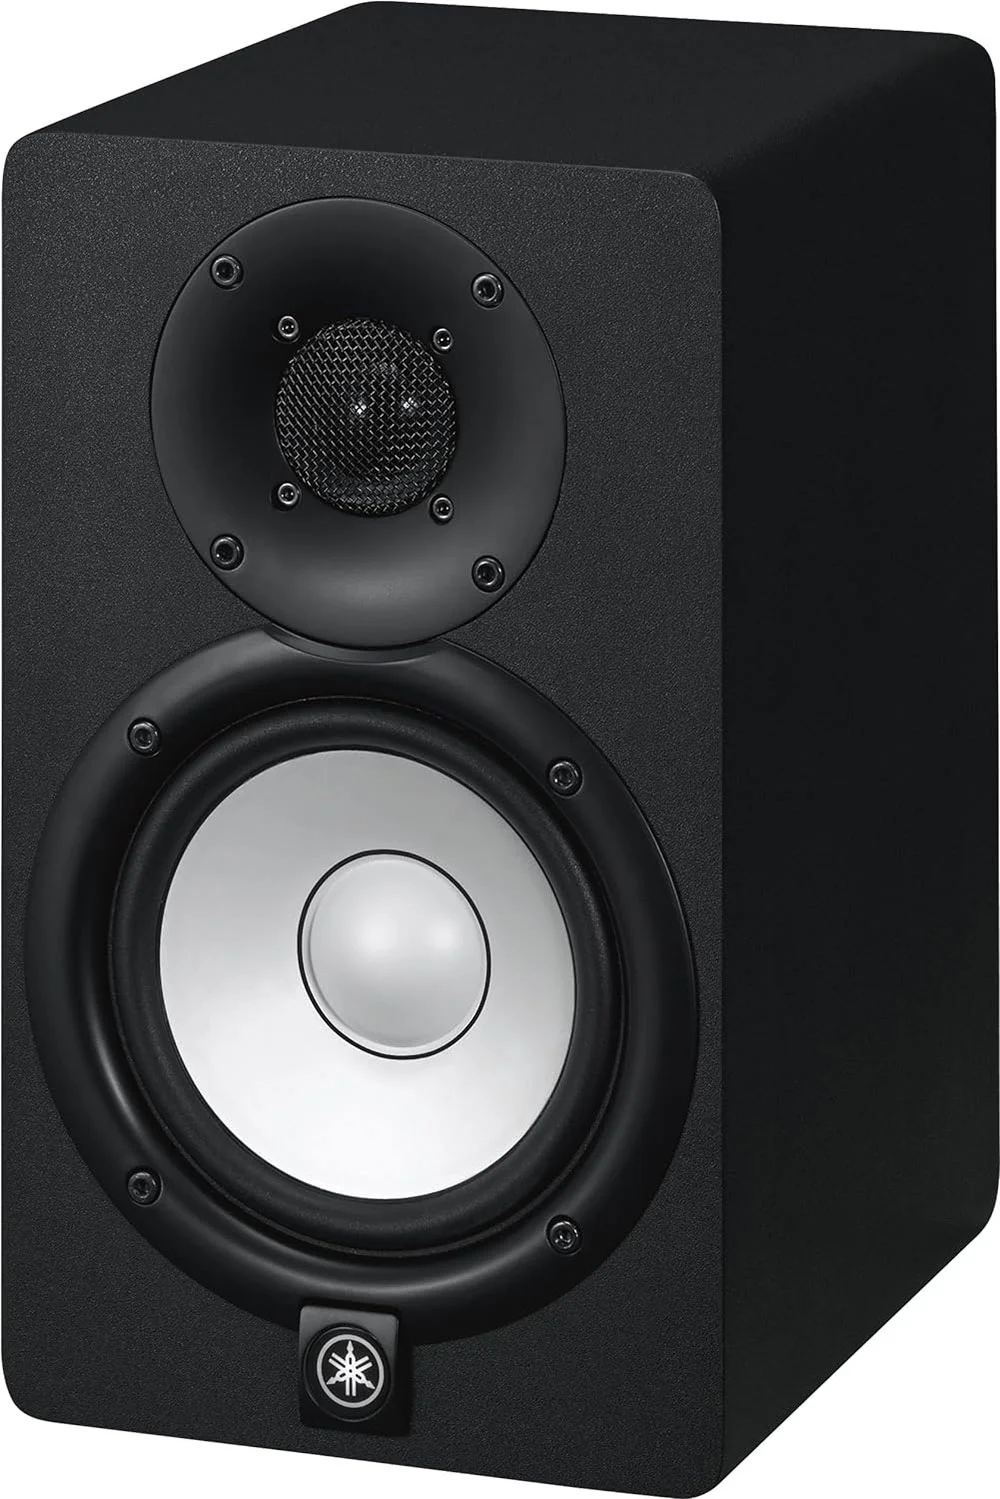 Featured image for “Yamaha HS5 Powered Studio Monitor Review”